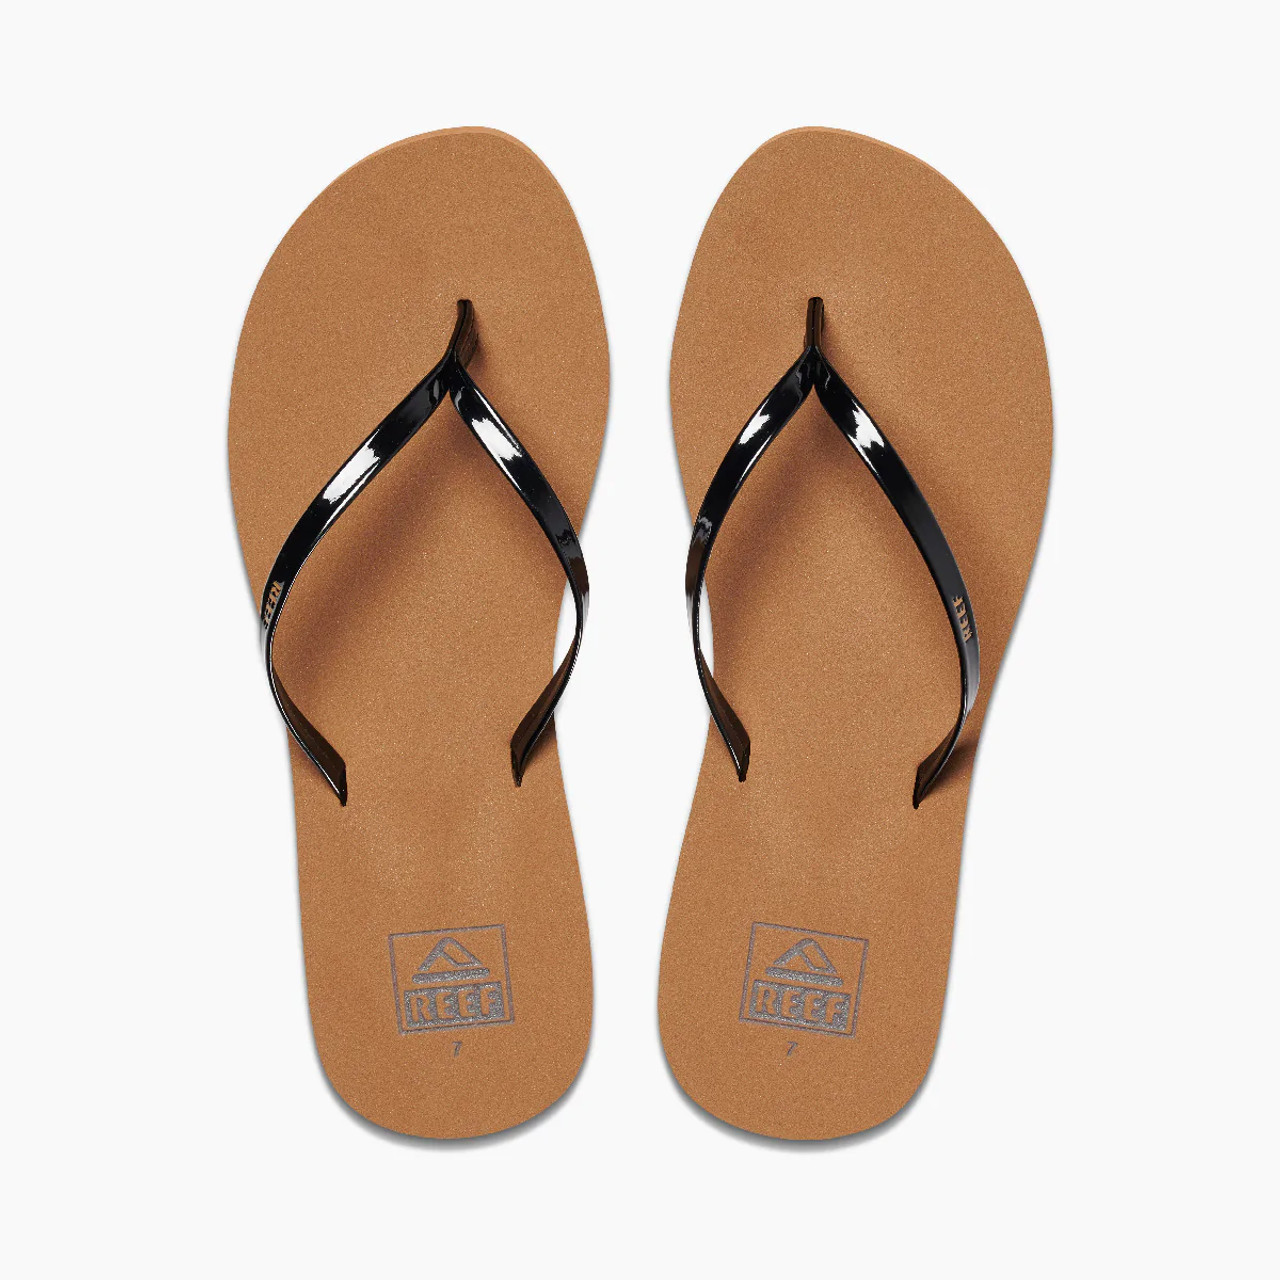 REEF BLISS NIGHTS SANDALS- Catalyst